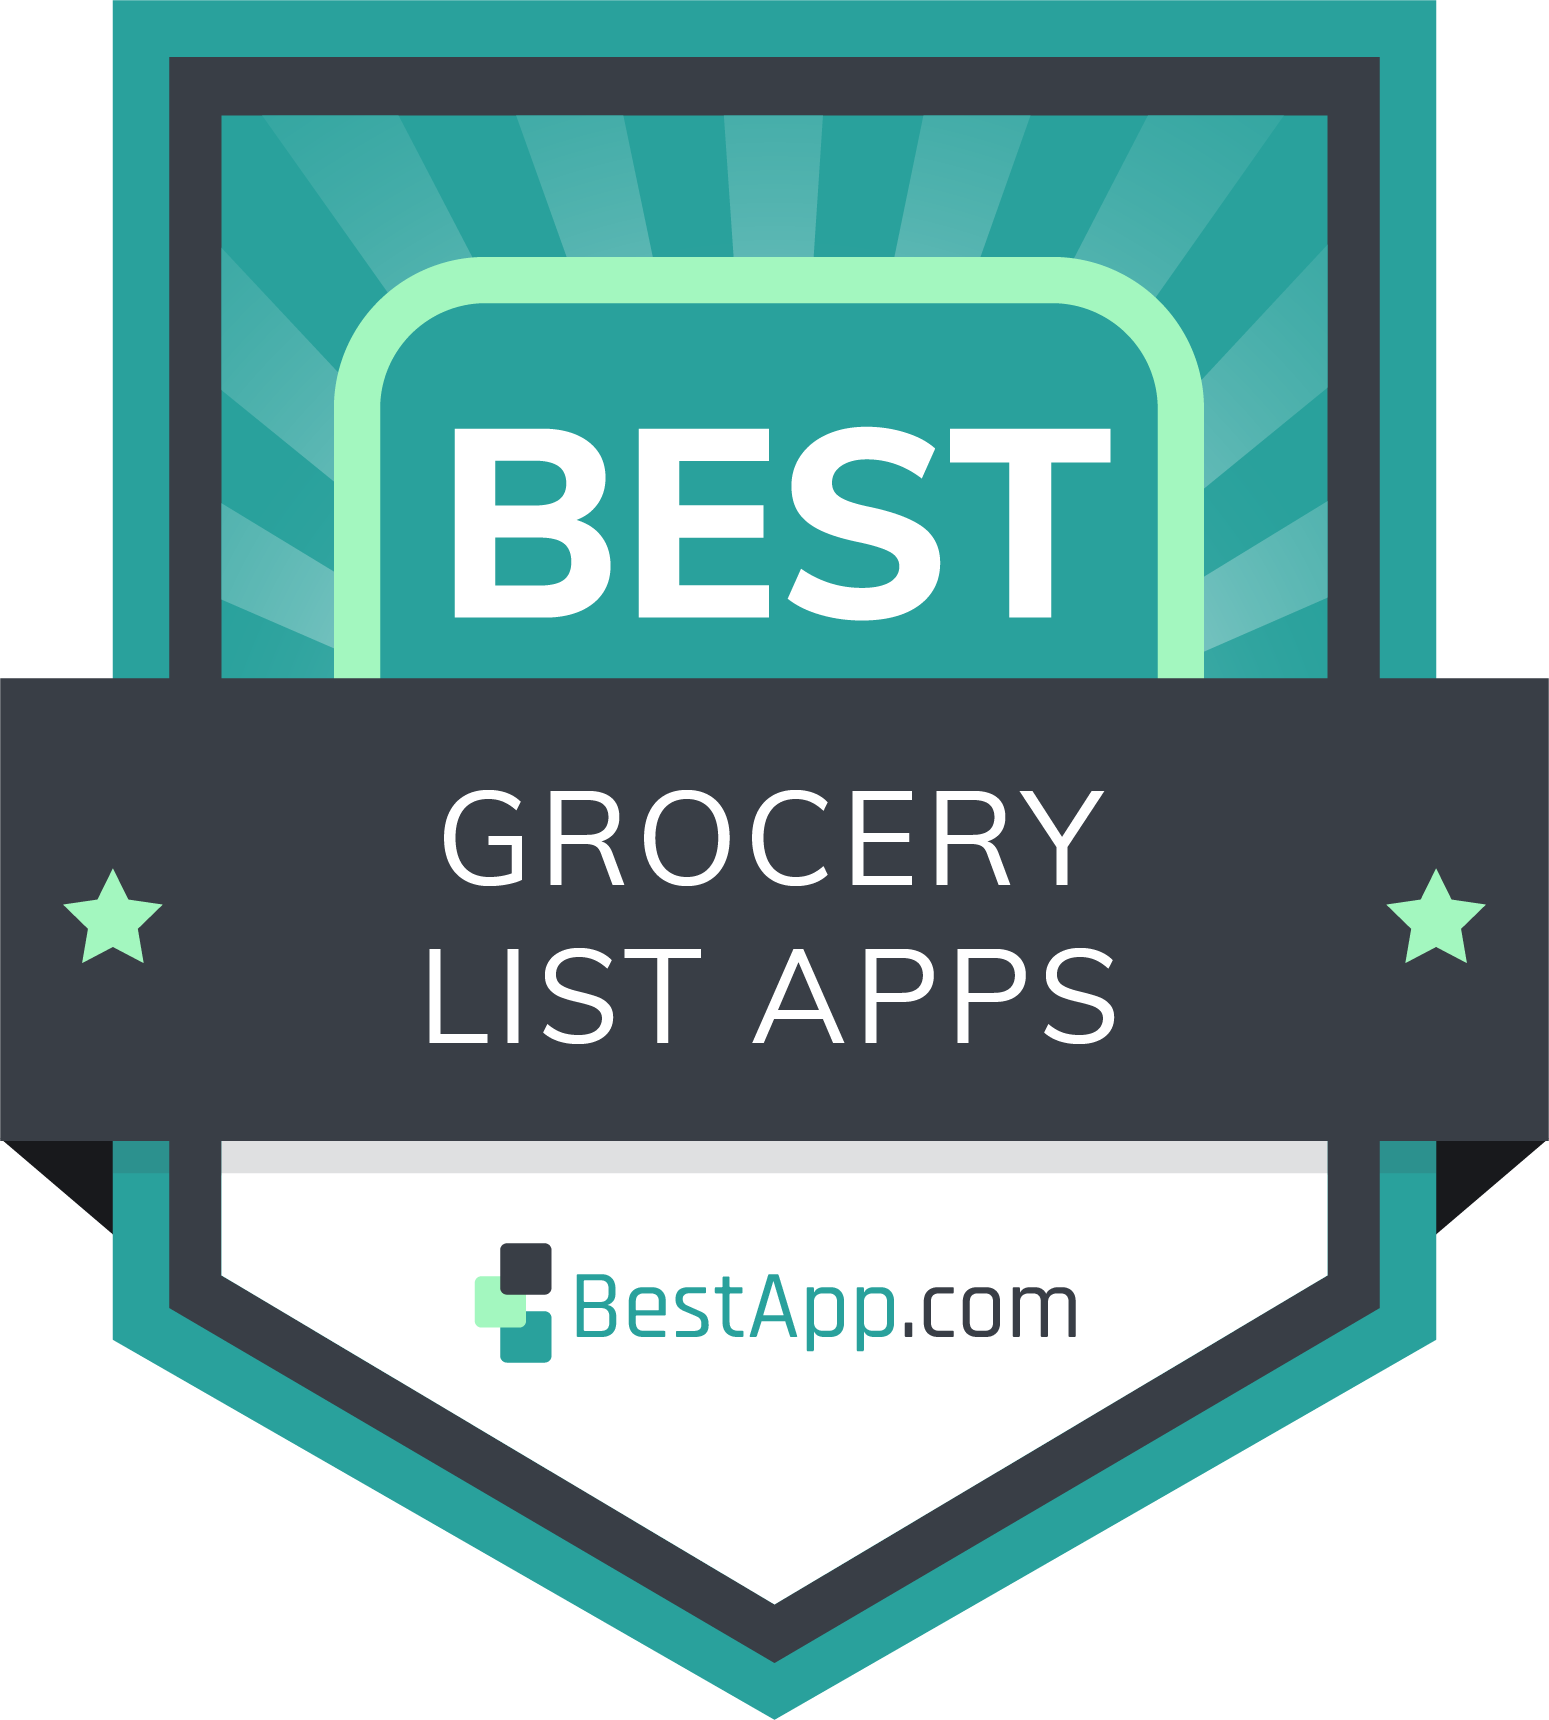 Best Grocery List Apps Badge